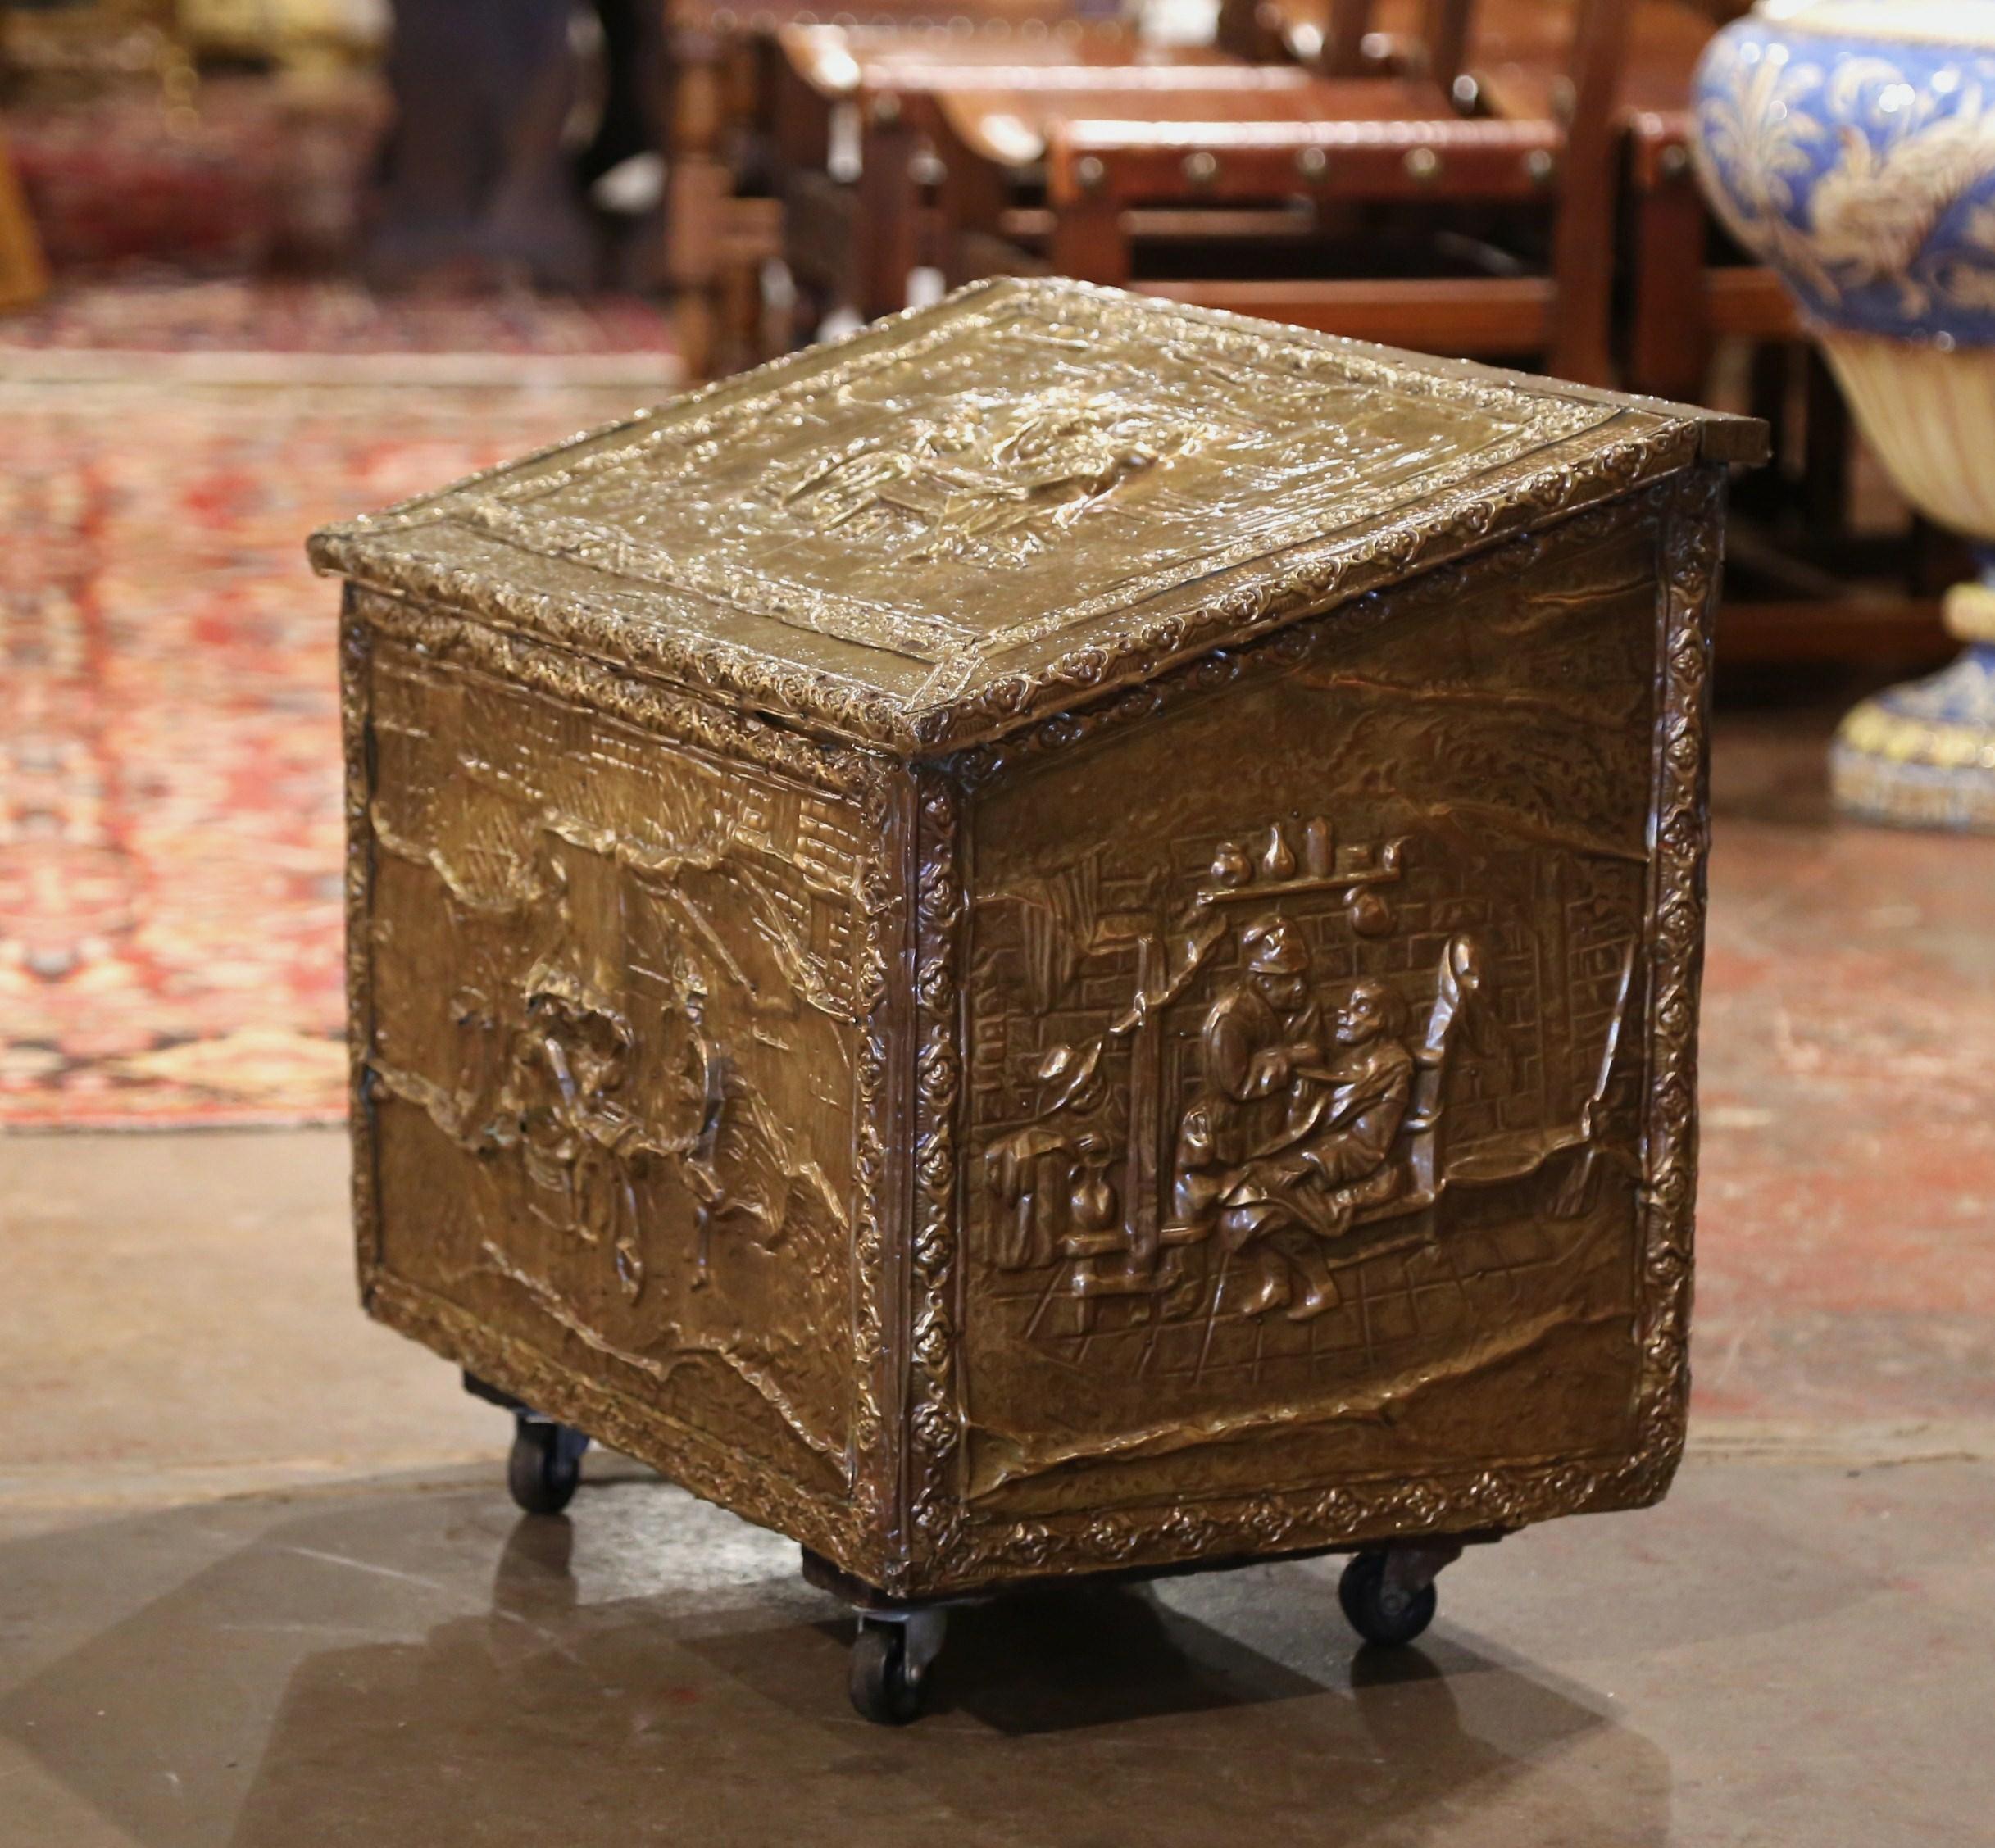 Crafted in France, circa 1920, the antique wood and brass fireplace wood coffer stands on casters; the trunk is decorated with repousse tavern scene motifs in the manner of David Teniers on all four sides including the top and front; each scene